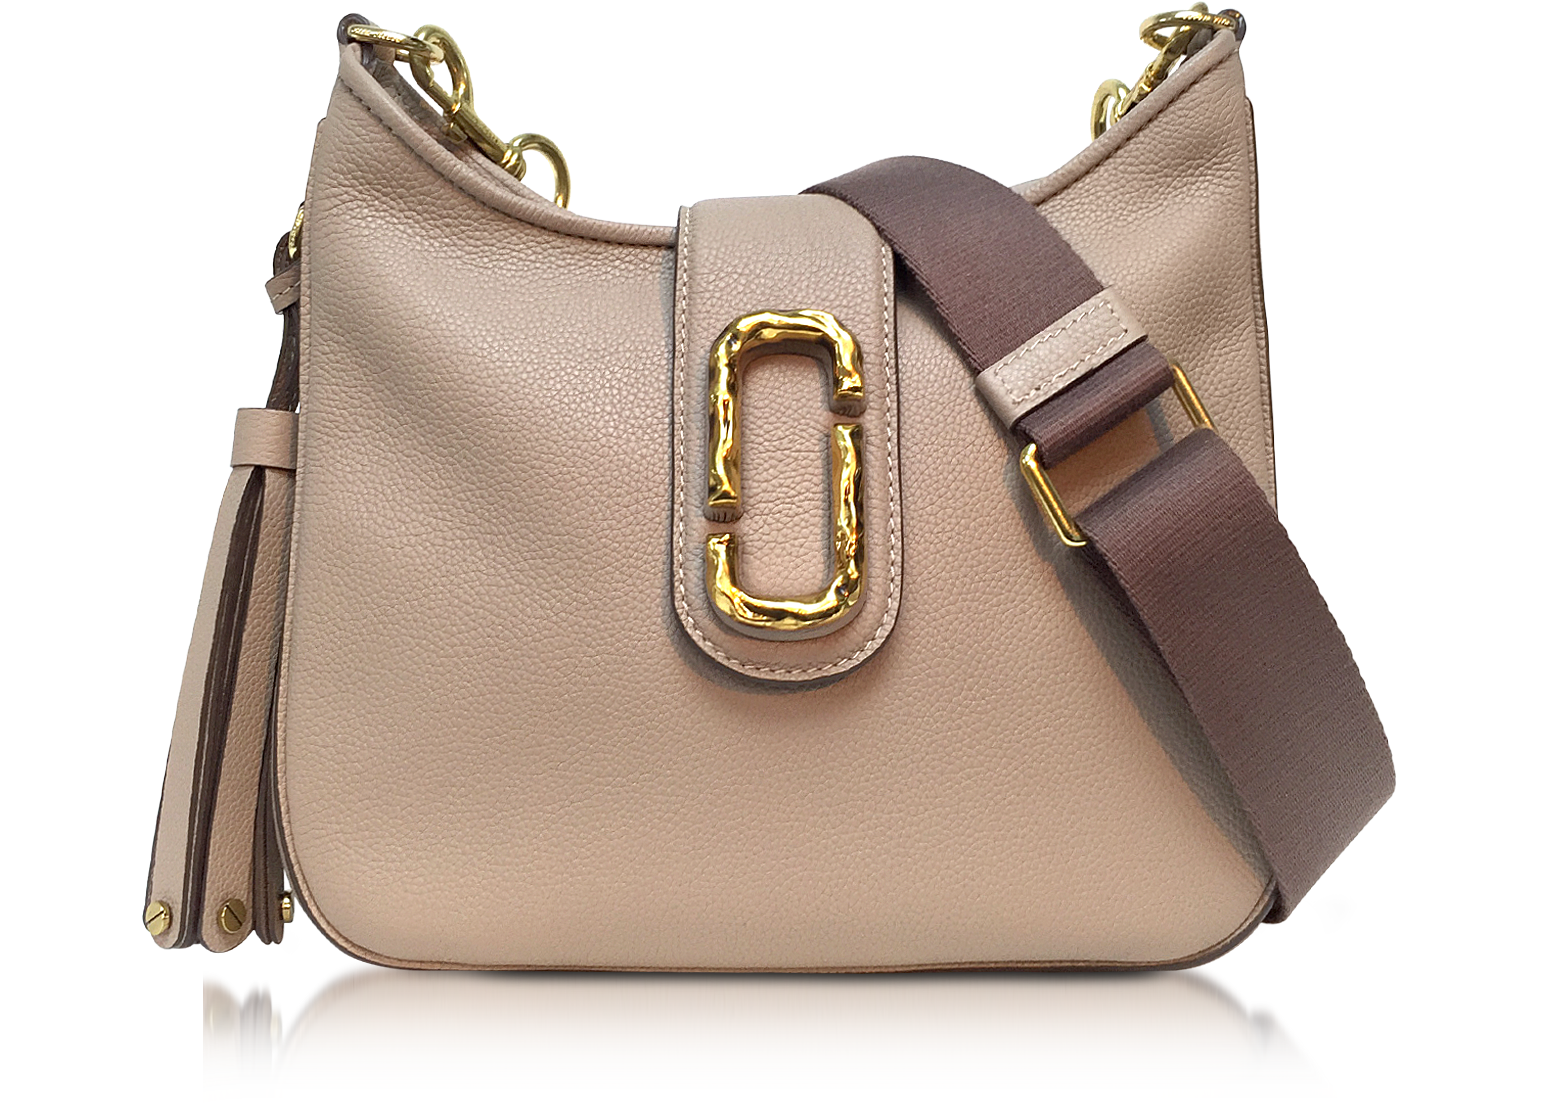 Marc Jacobs Interlock Taupe Leather Small Hobo Bag at FORZIERI